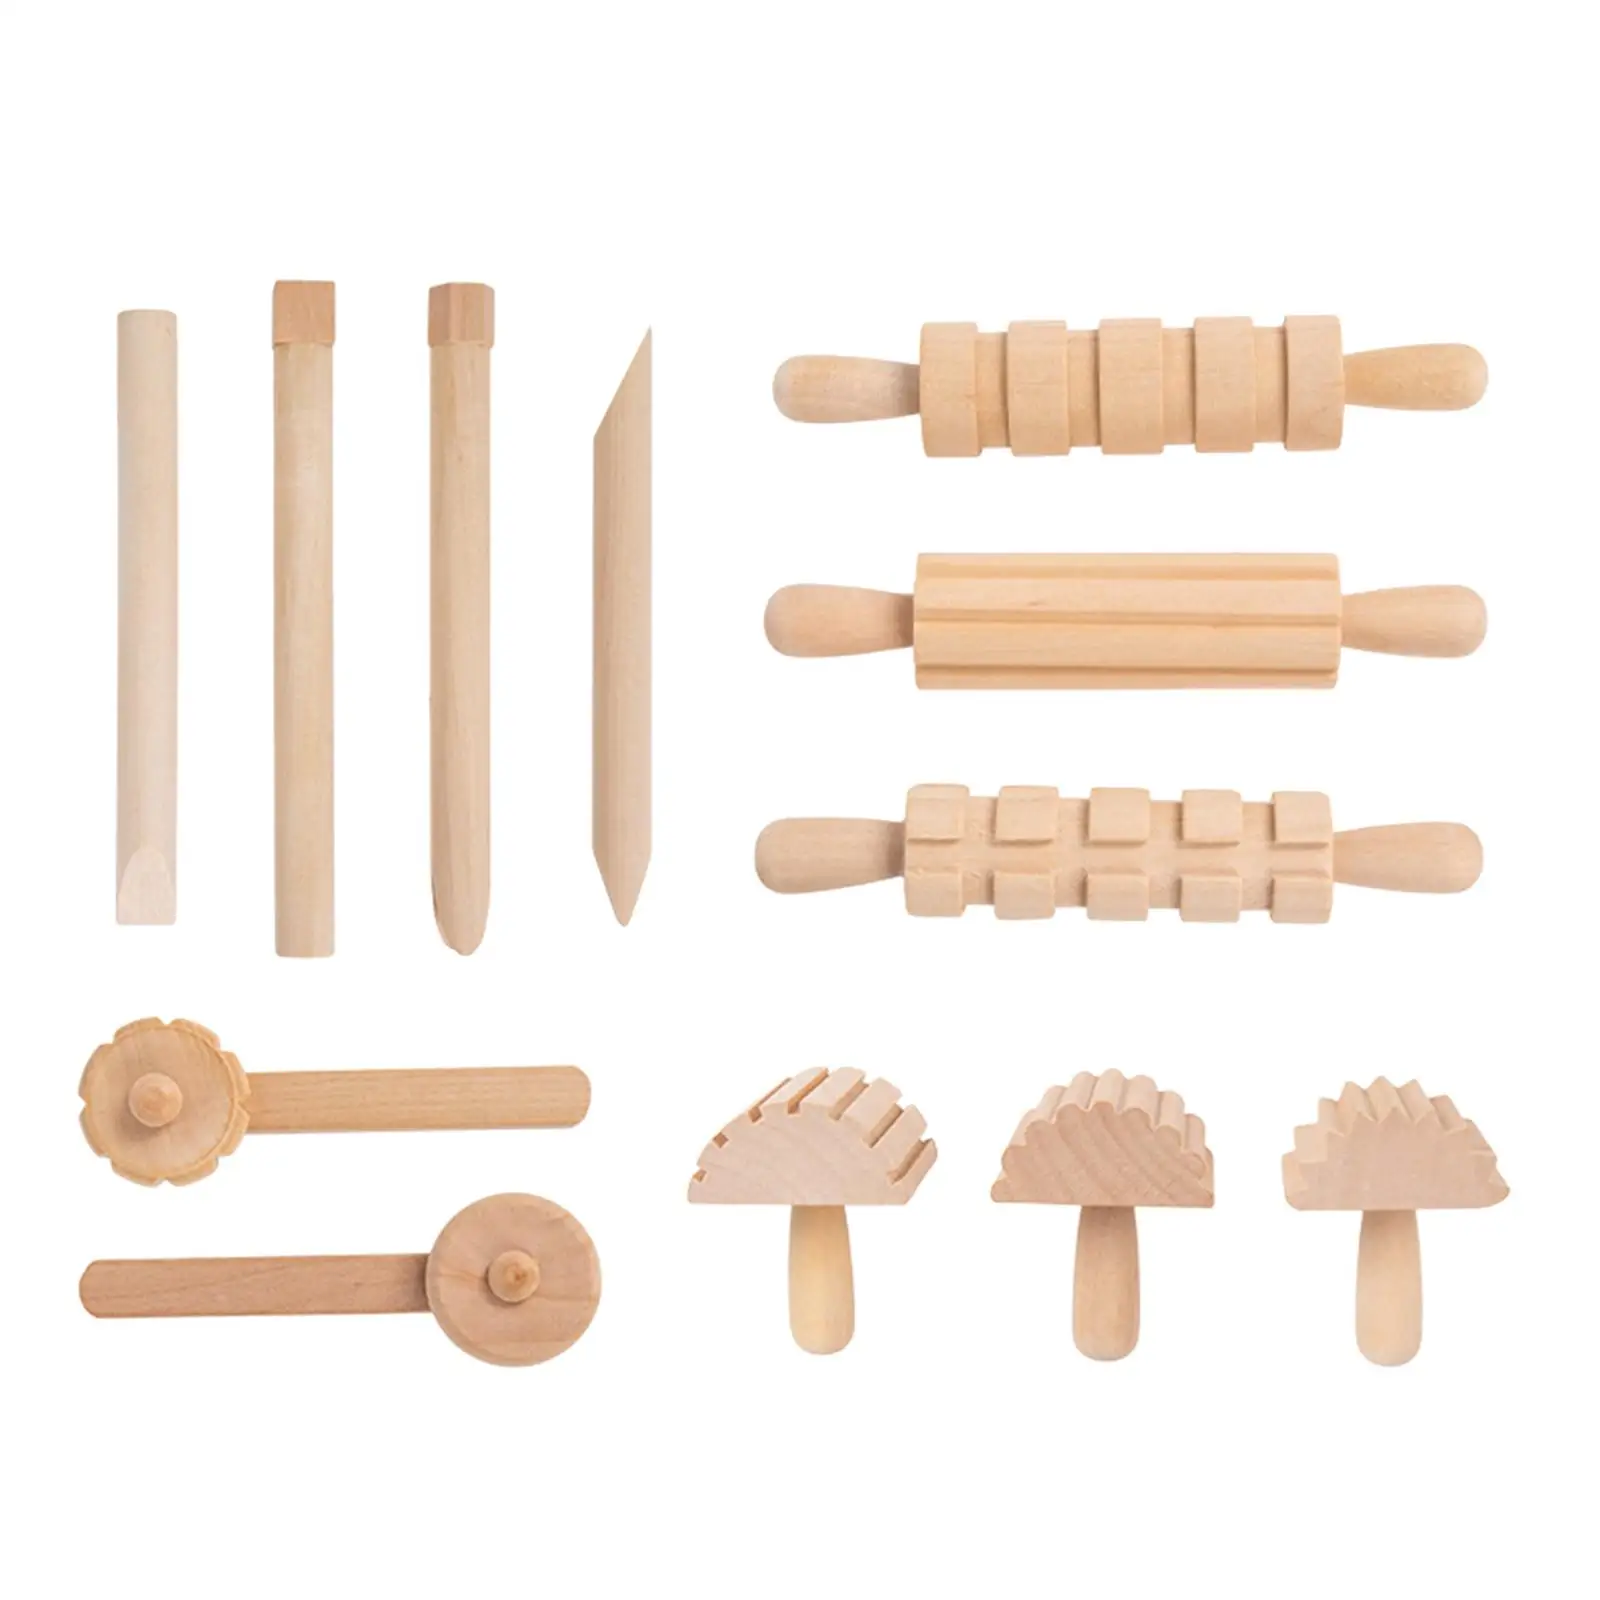 Wooden Tools Set, 12 Pieces Cookie DIY Handmade Baking Accessories  Ages 3 and up Pottery Tools for Birthday Gift Crafts